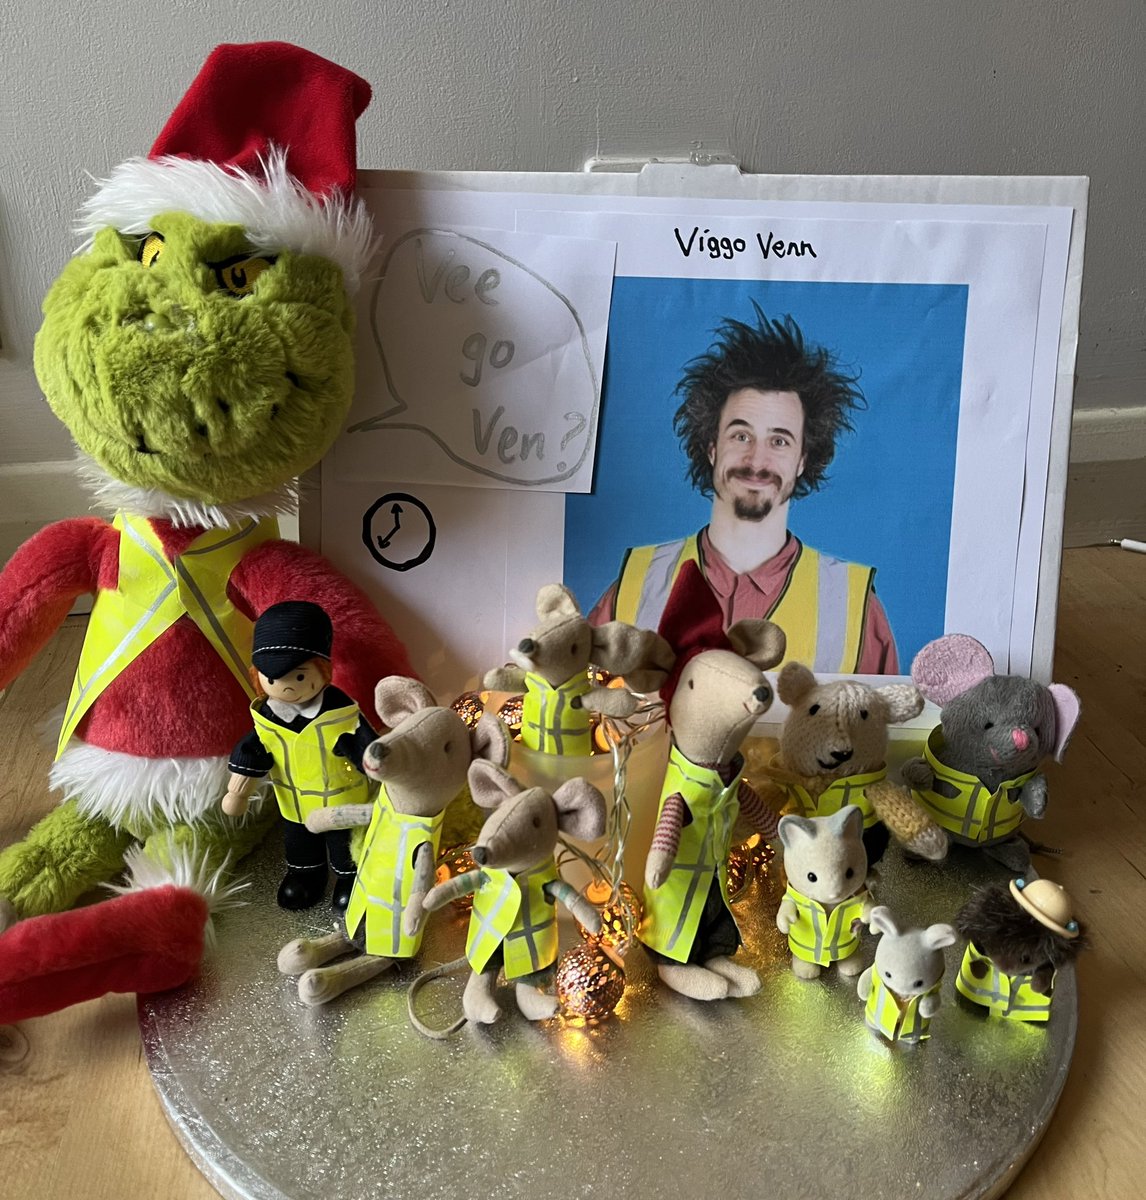 Took the kids to see @ViggoVenn & we laughed so much. Absolutely hilarious! Had to make the kids toy Christmas mice & their friends high-vis jackets too! #ViggoVenn #Clown #comedy #MailegMice